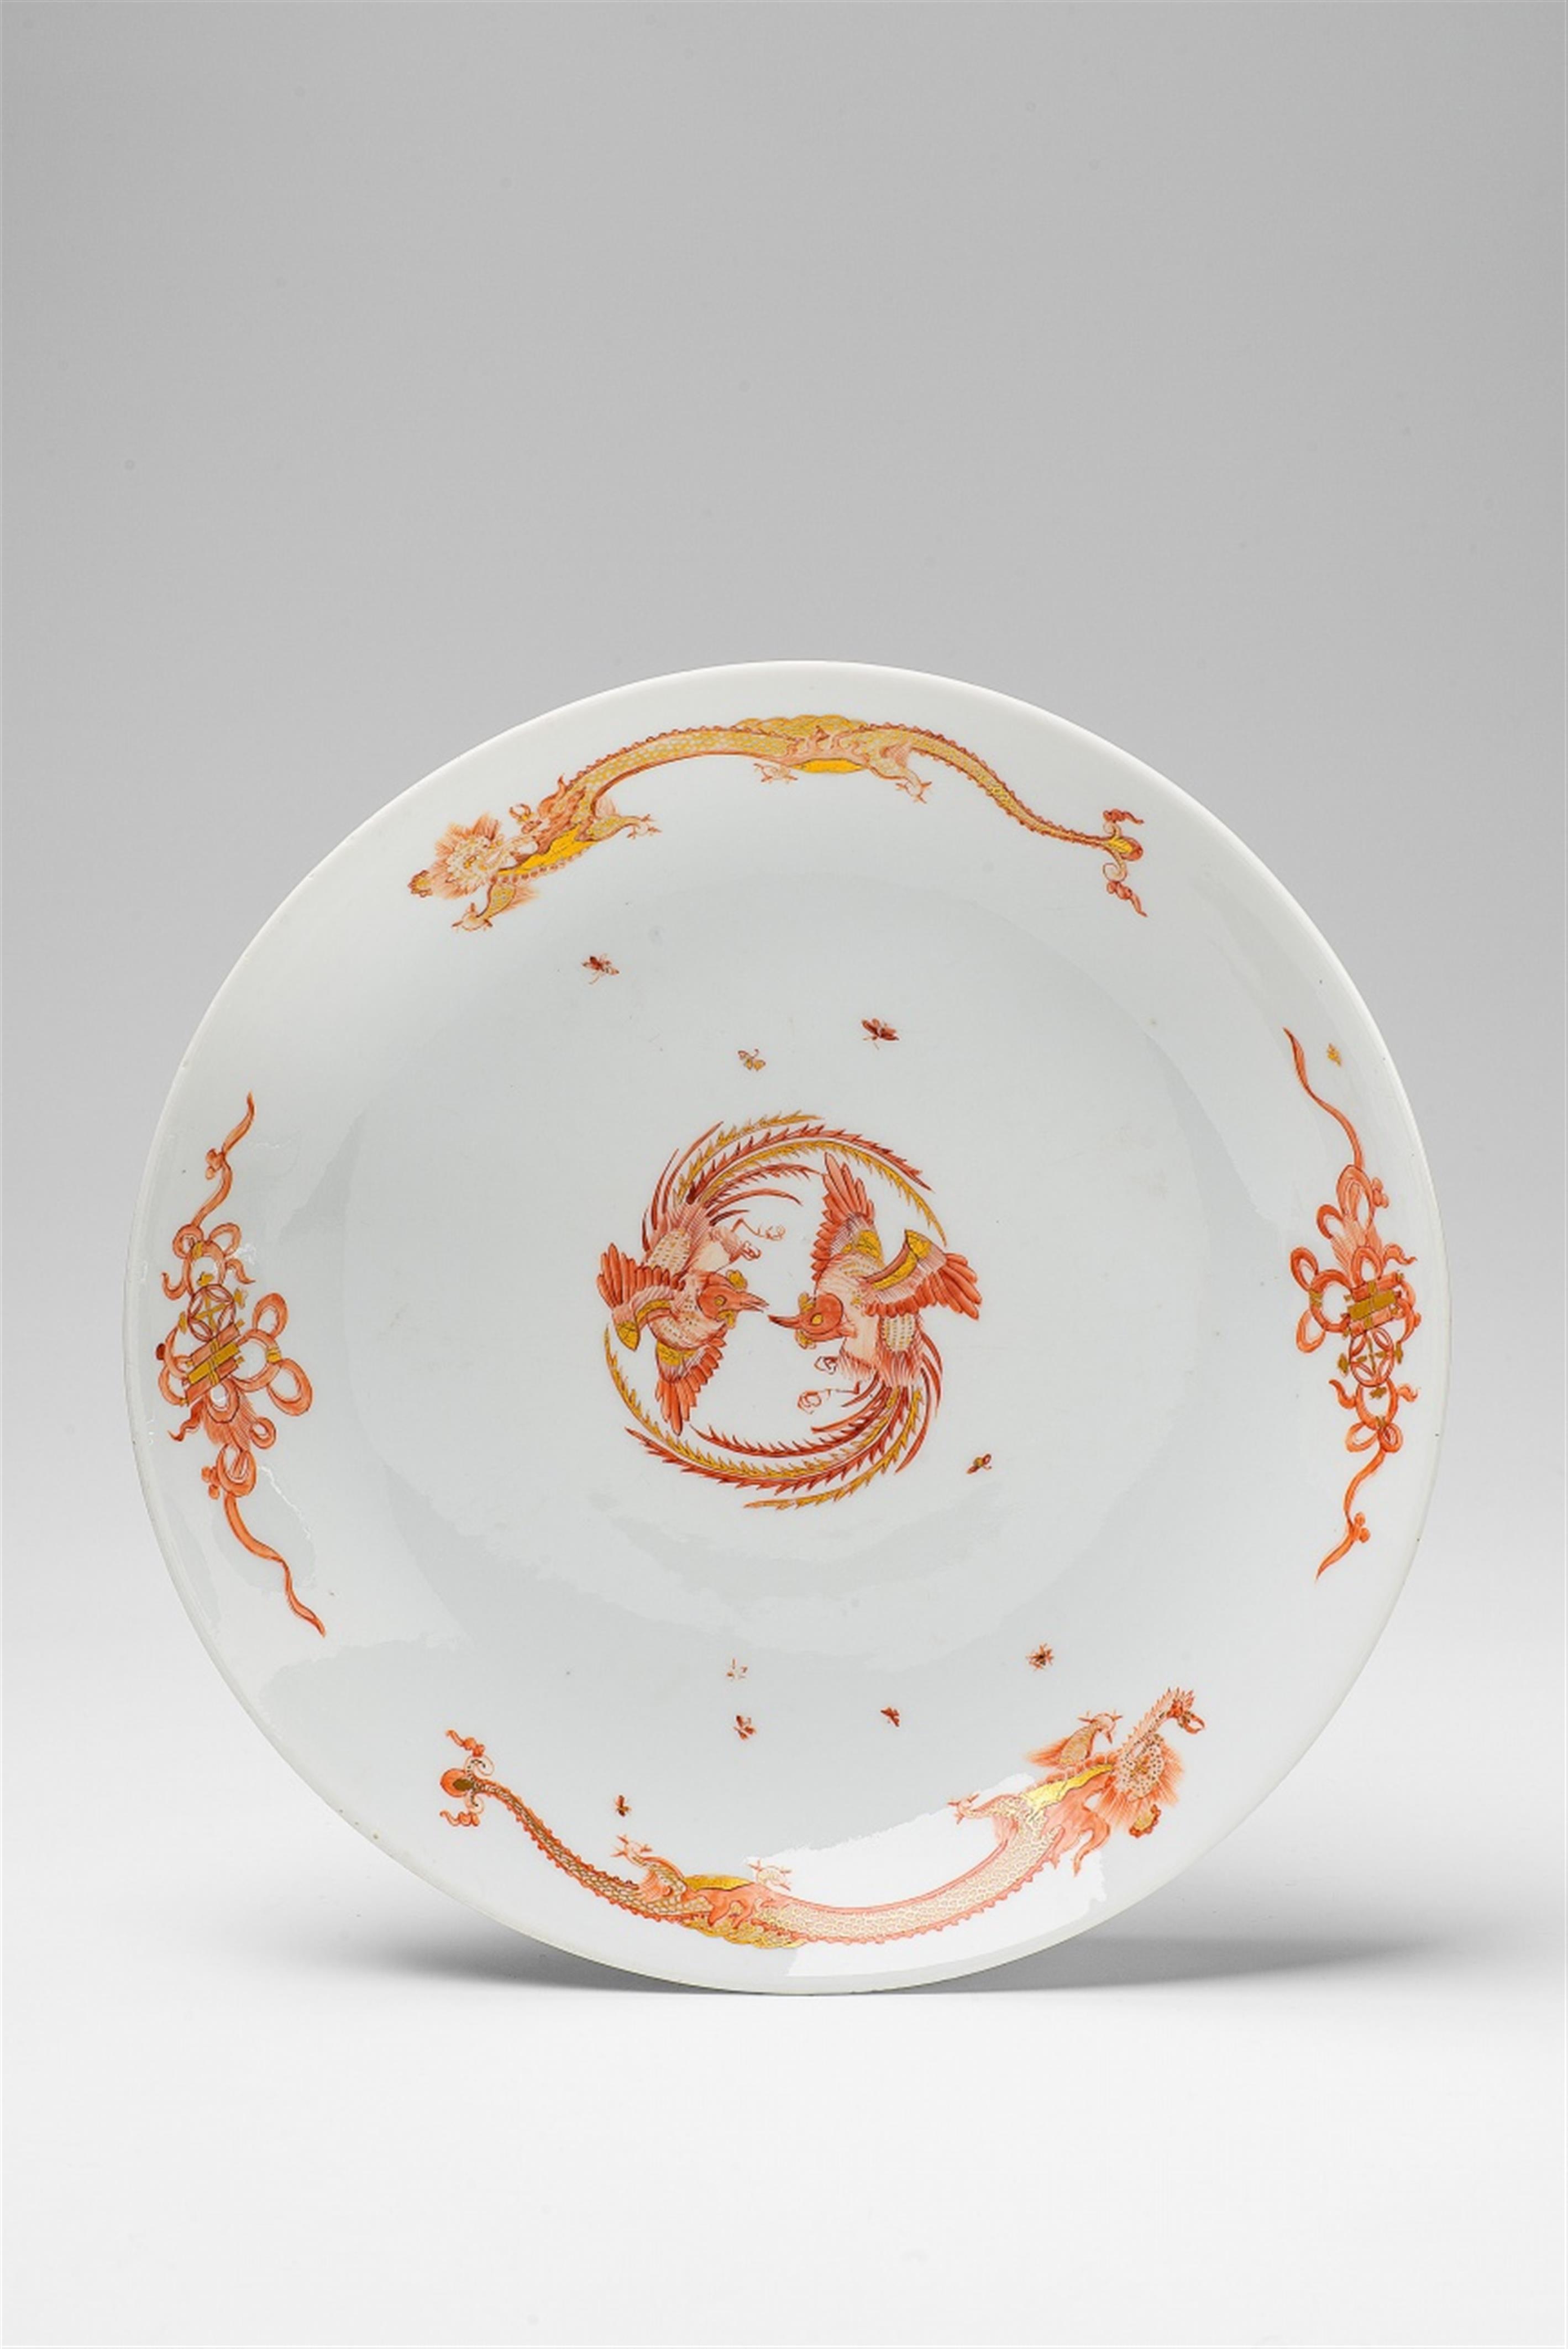 A Meissen porcelain dish with red dragon decor - image-1